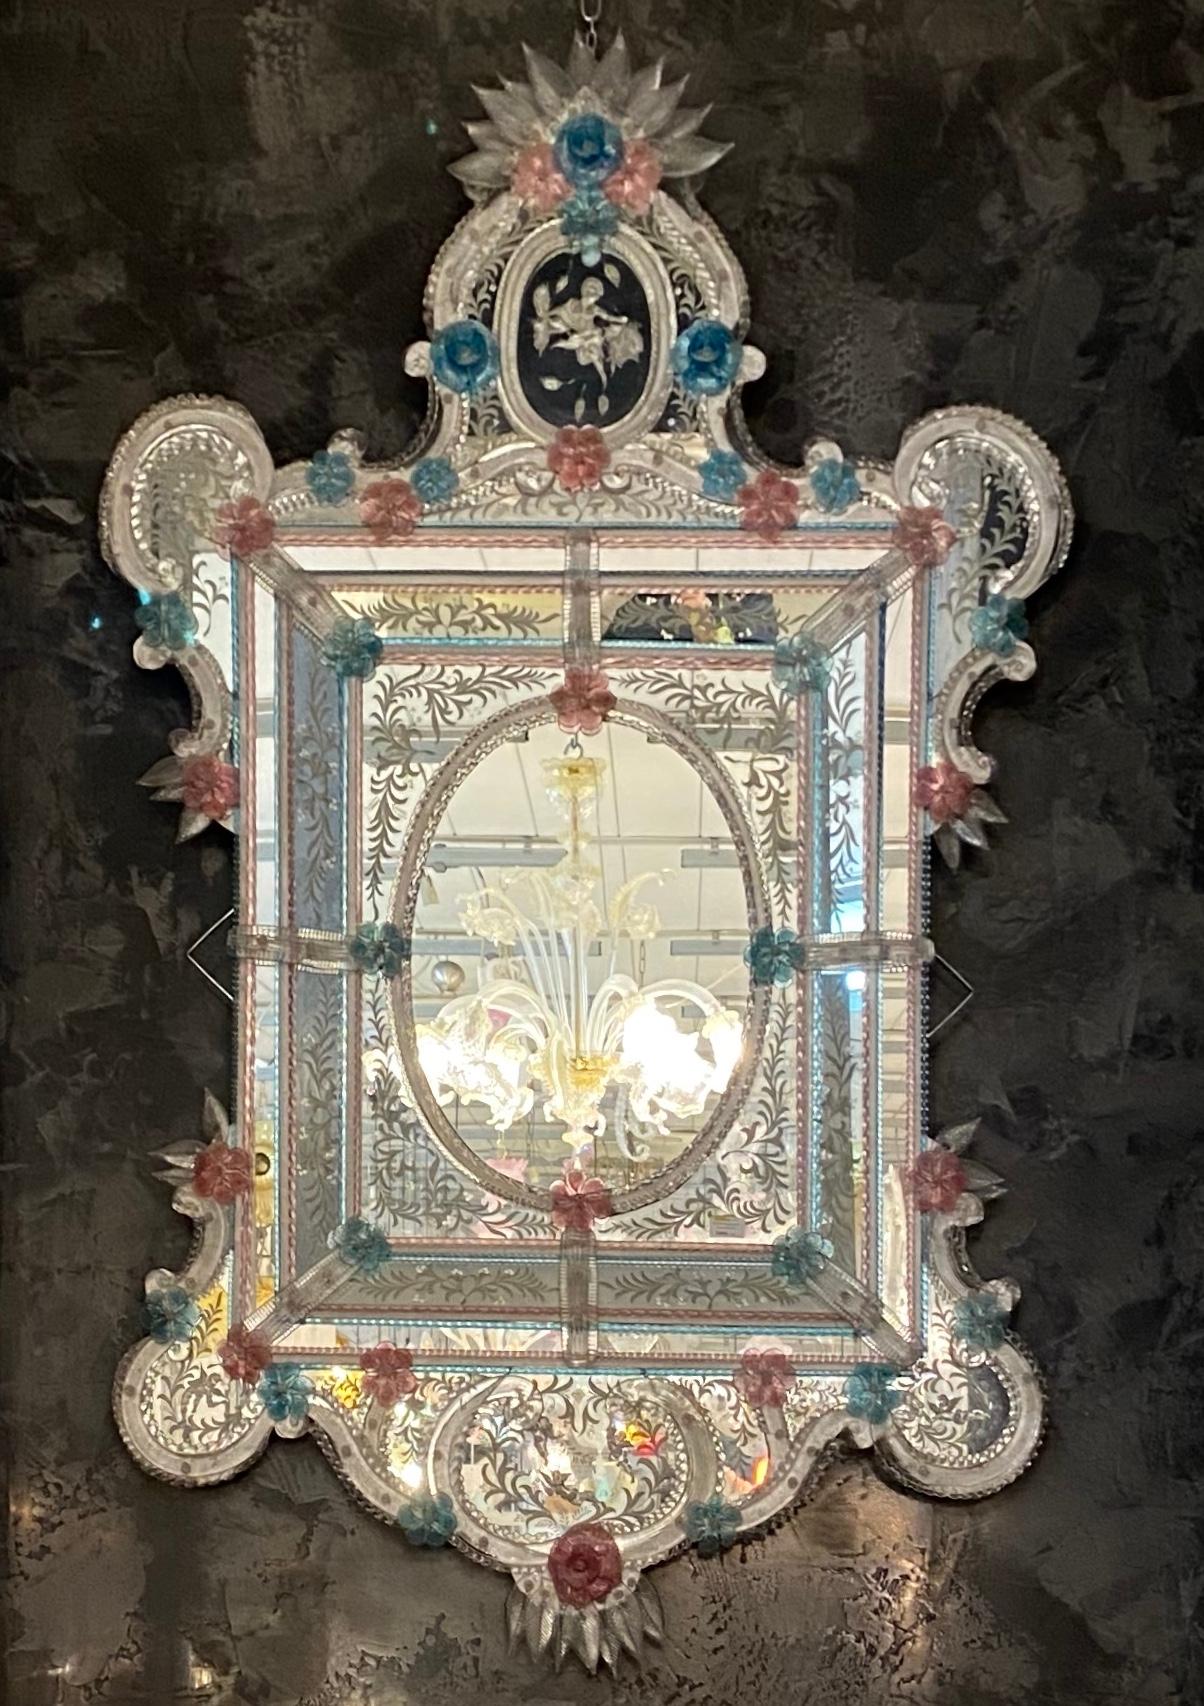 This beautiful Venetian mirror features etched floral motifs adorning the mirrored frame. Along the edges of the frame are glass rope accents and numerous glass pink and blu flowers.
Executed by the great a Master of Murano.
Excellent